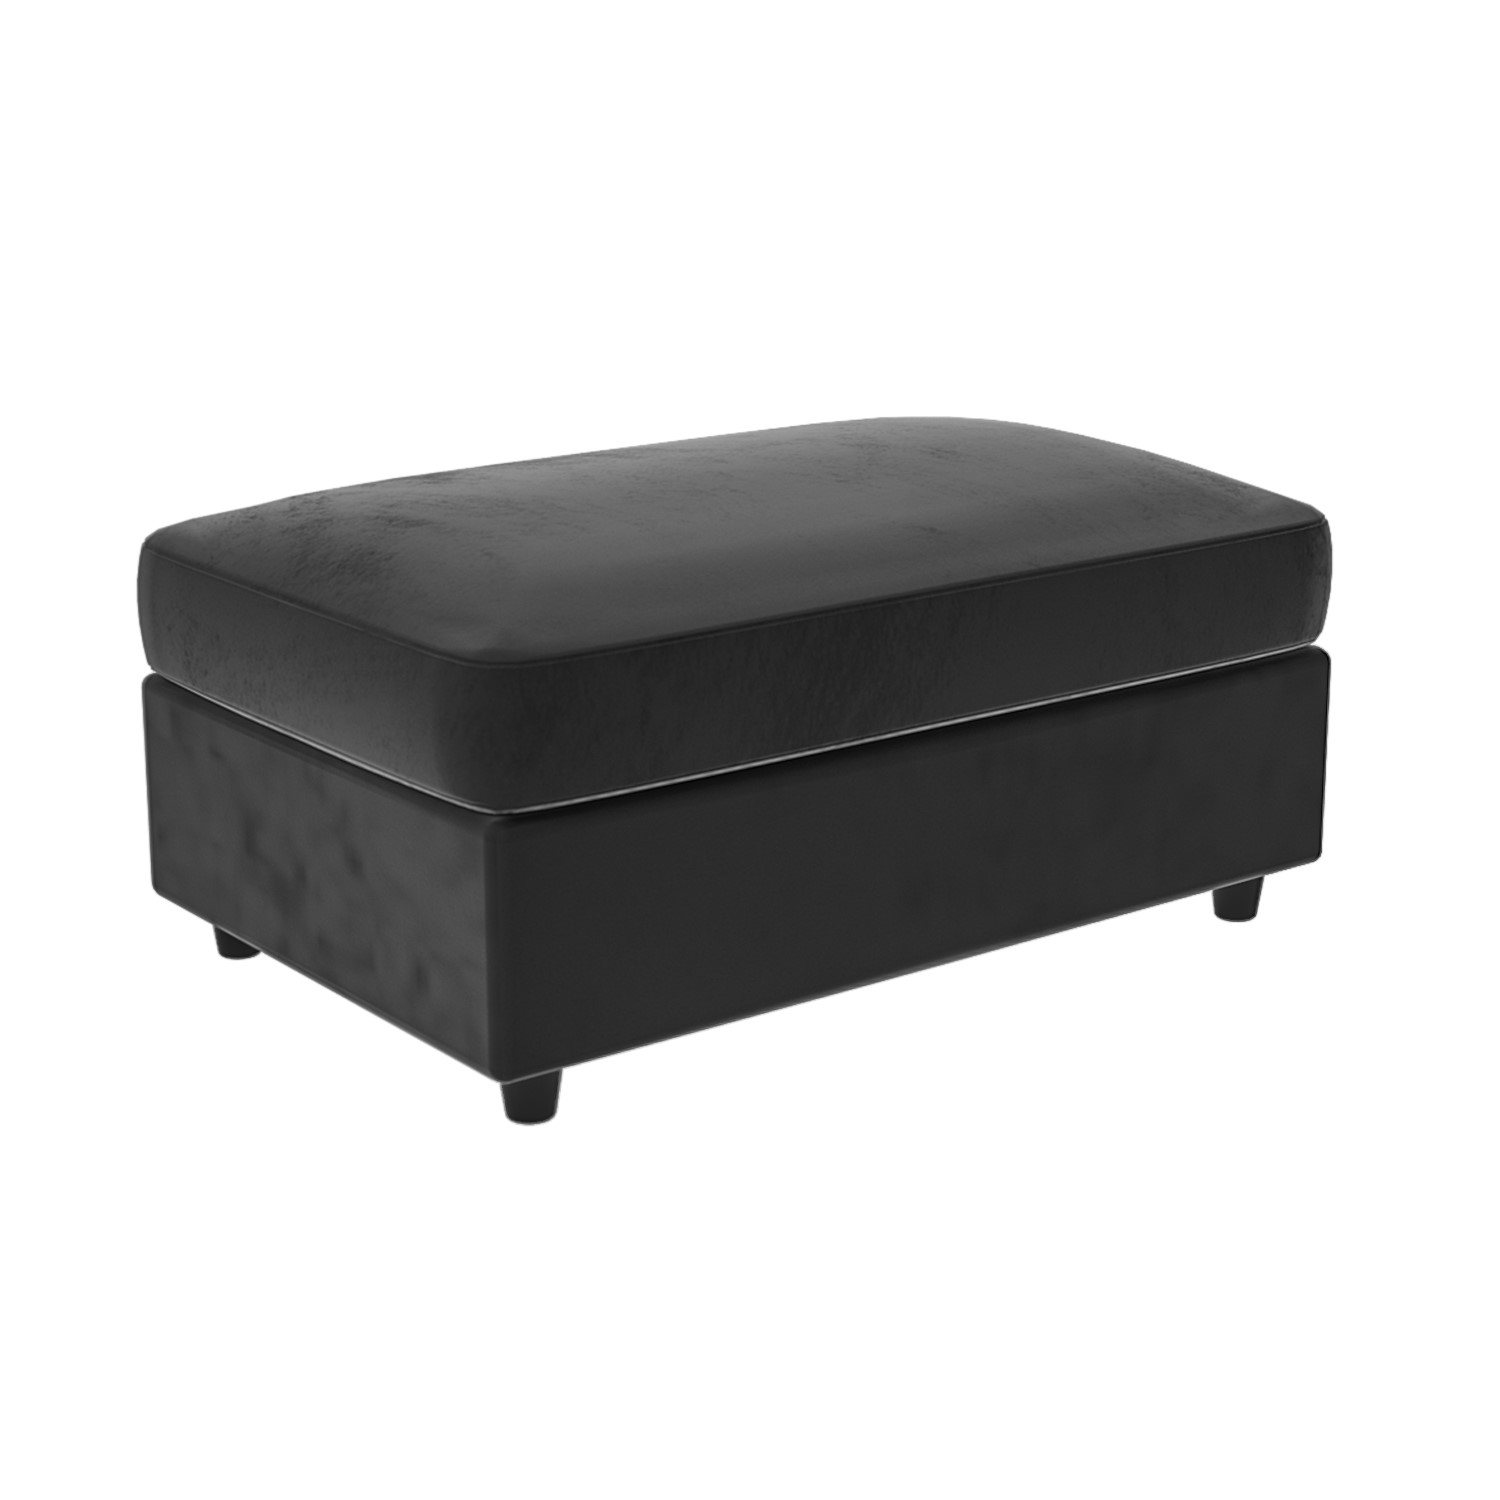 Read more about Large dark grey velvet footstool august